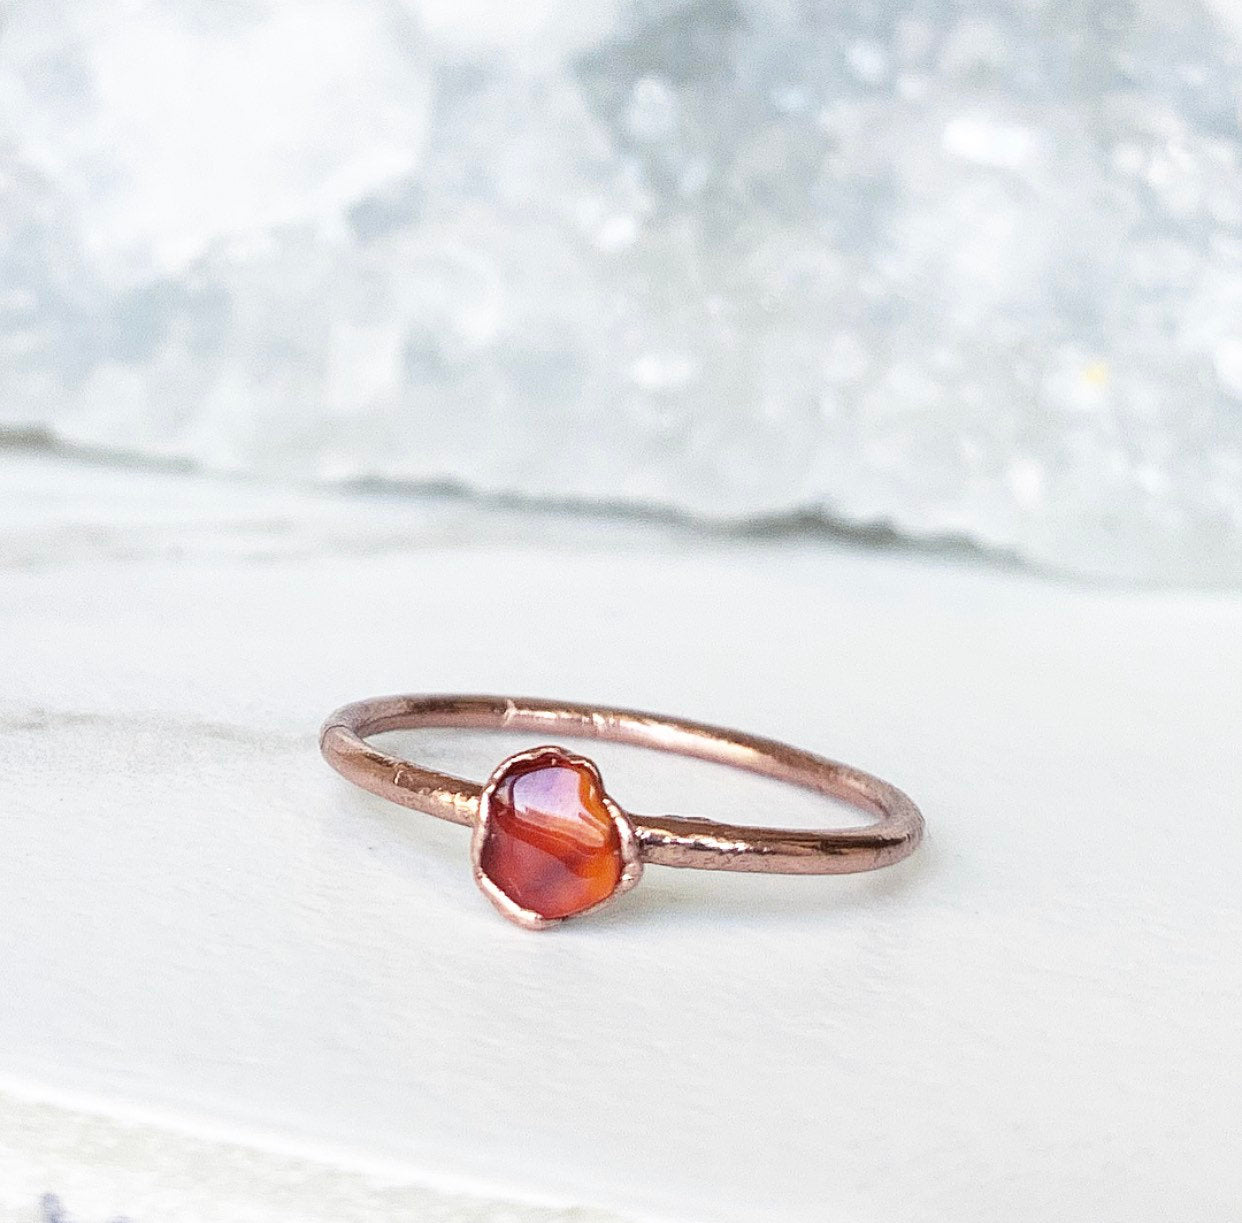 Dainty Carnelian Stone Ring, Delicate Healing Crystal Jewelry, Tiny Carnelian Crystal Ring, Healing Crystal Gift, Raw Stone Stacking Ring